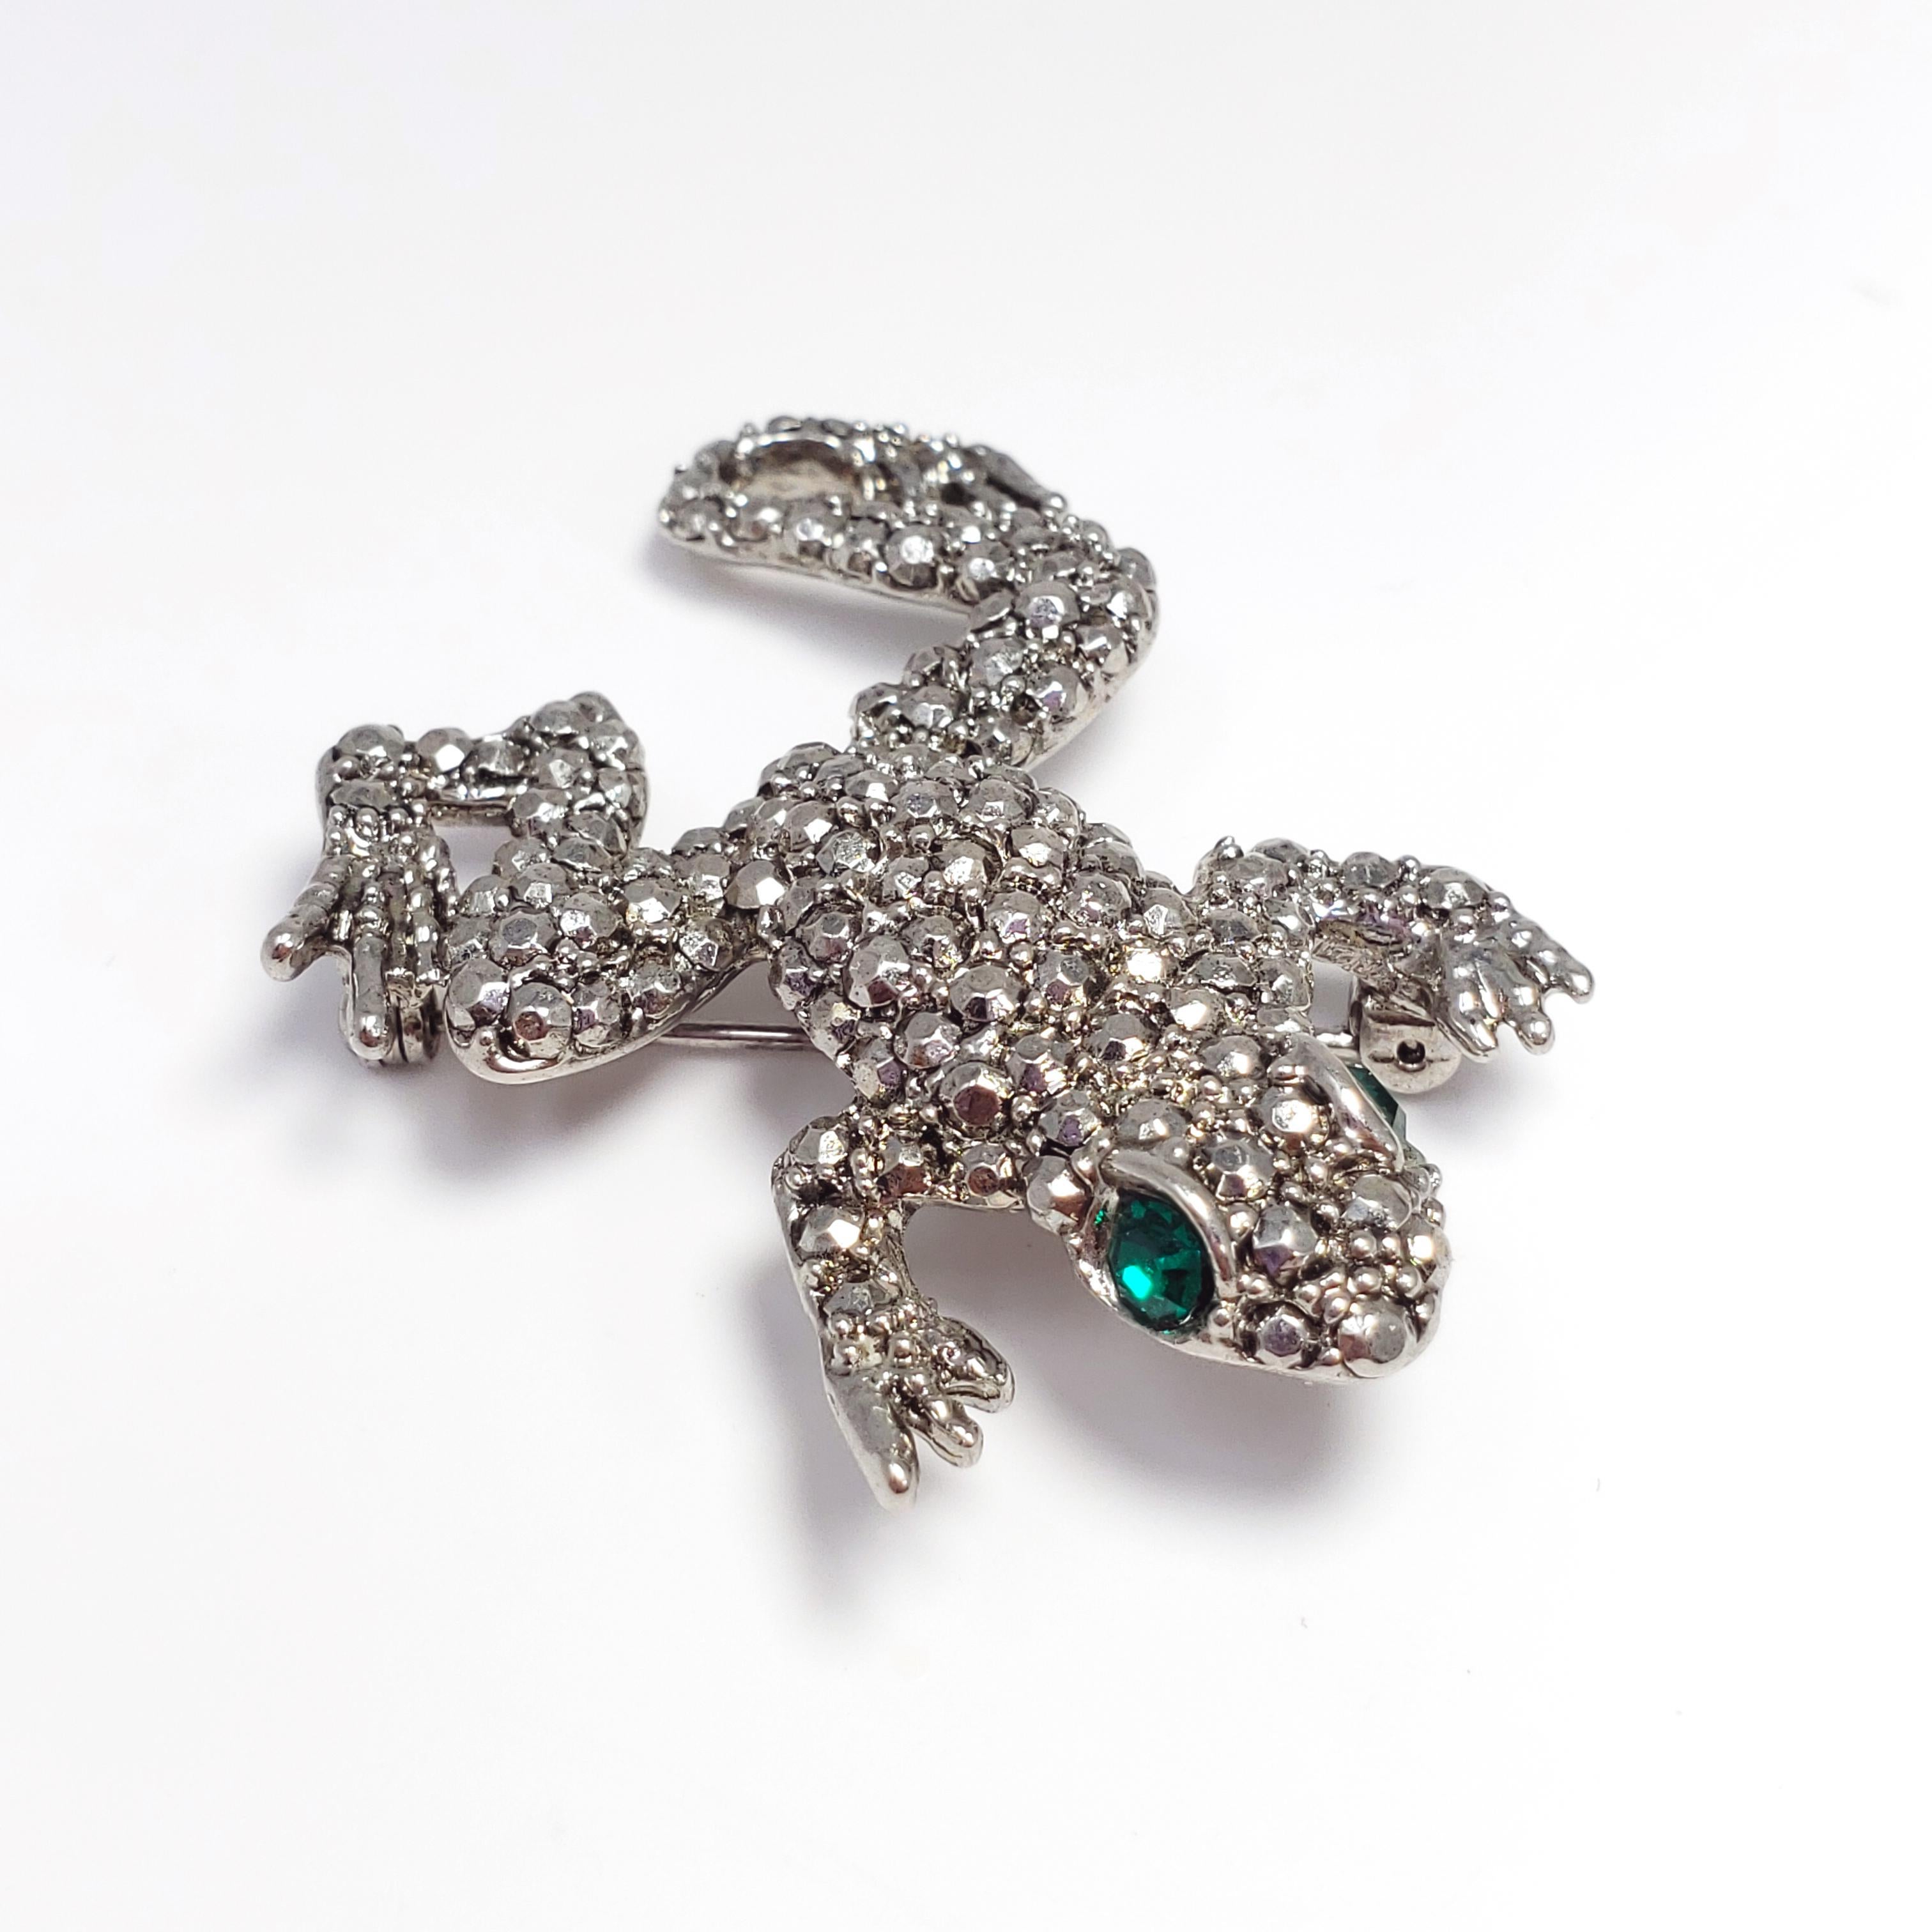 Silver frog brooch with pave marcasite and two brilliant green eyes. A whimsical vintage accessory from Hobe, circa 1940s.

Hallmarks: Hobé ©